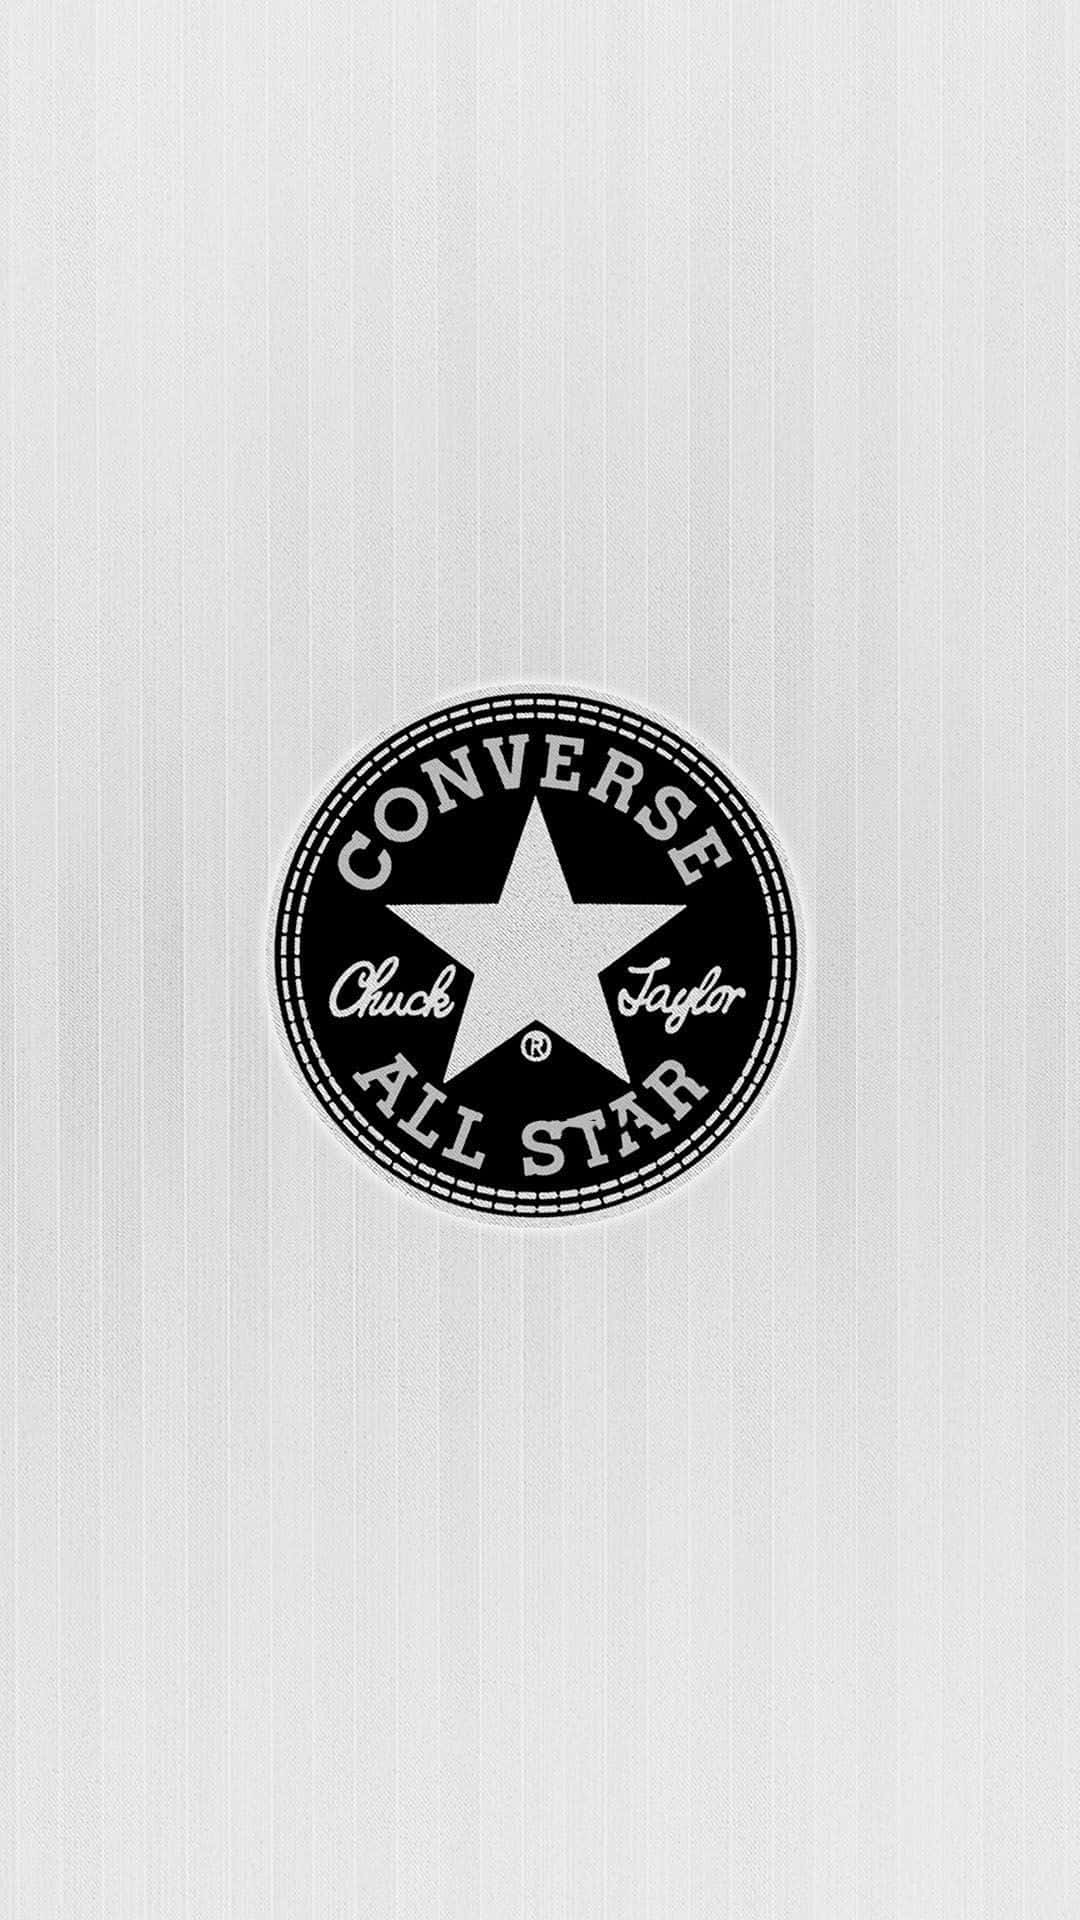 Converse Logo On A White Background